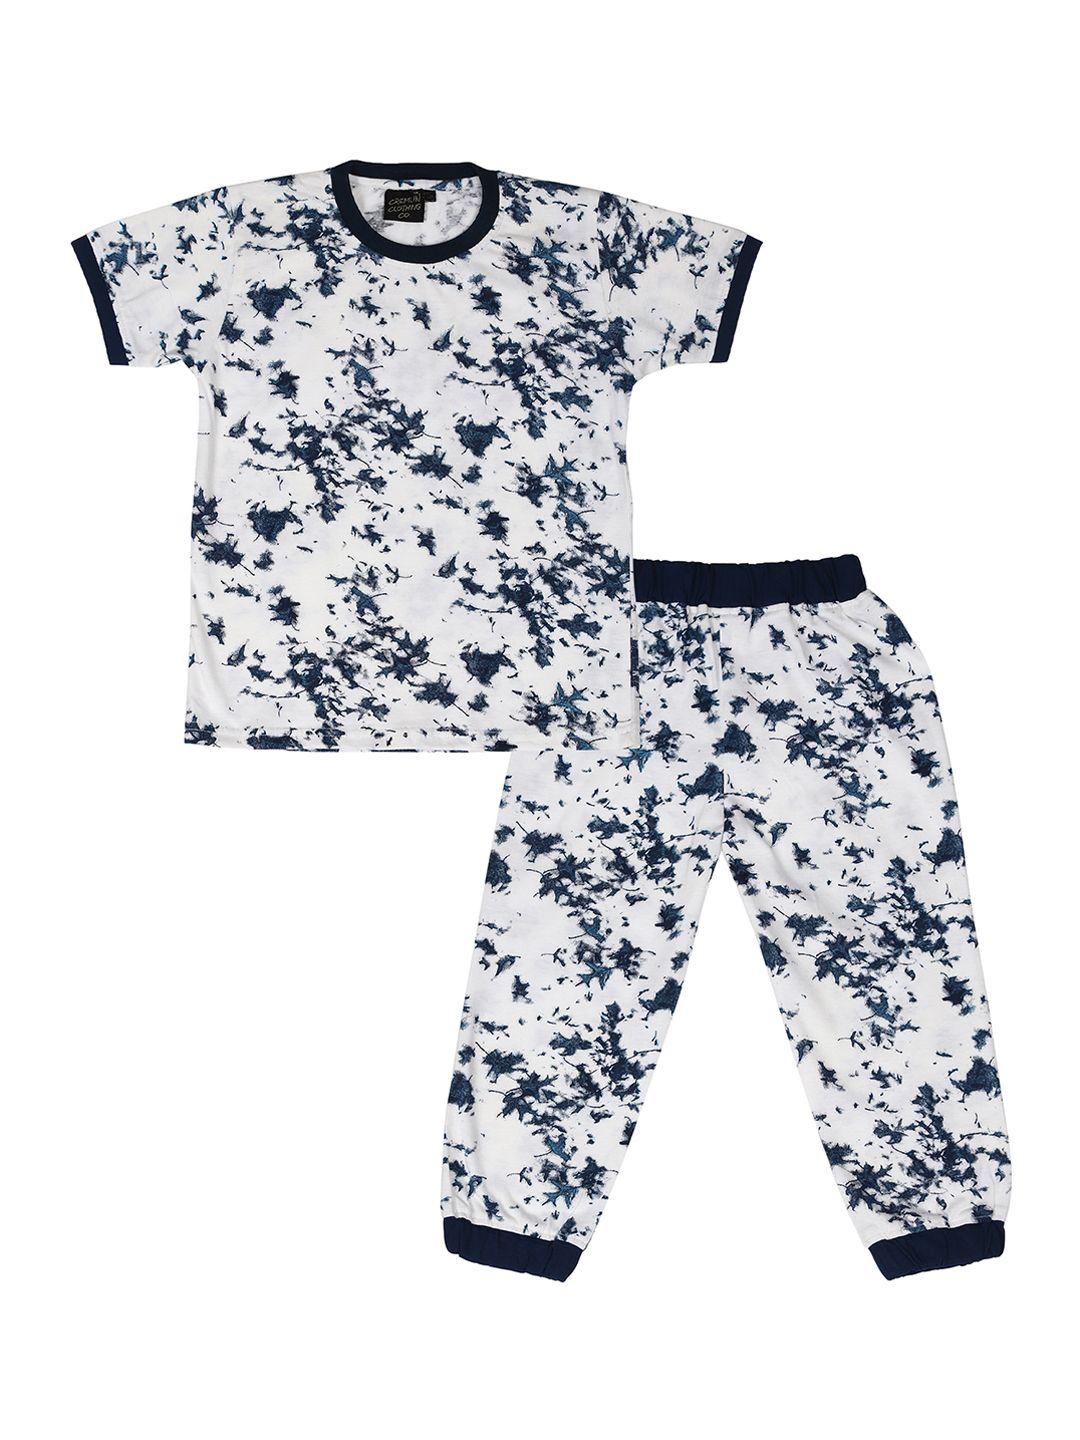 cremlin clothing kids white & navy blue printed pure cotton night suit